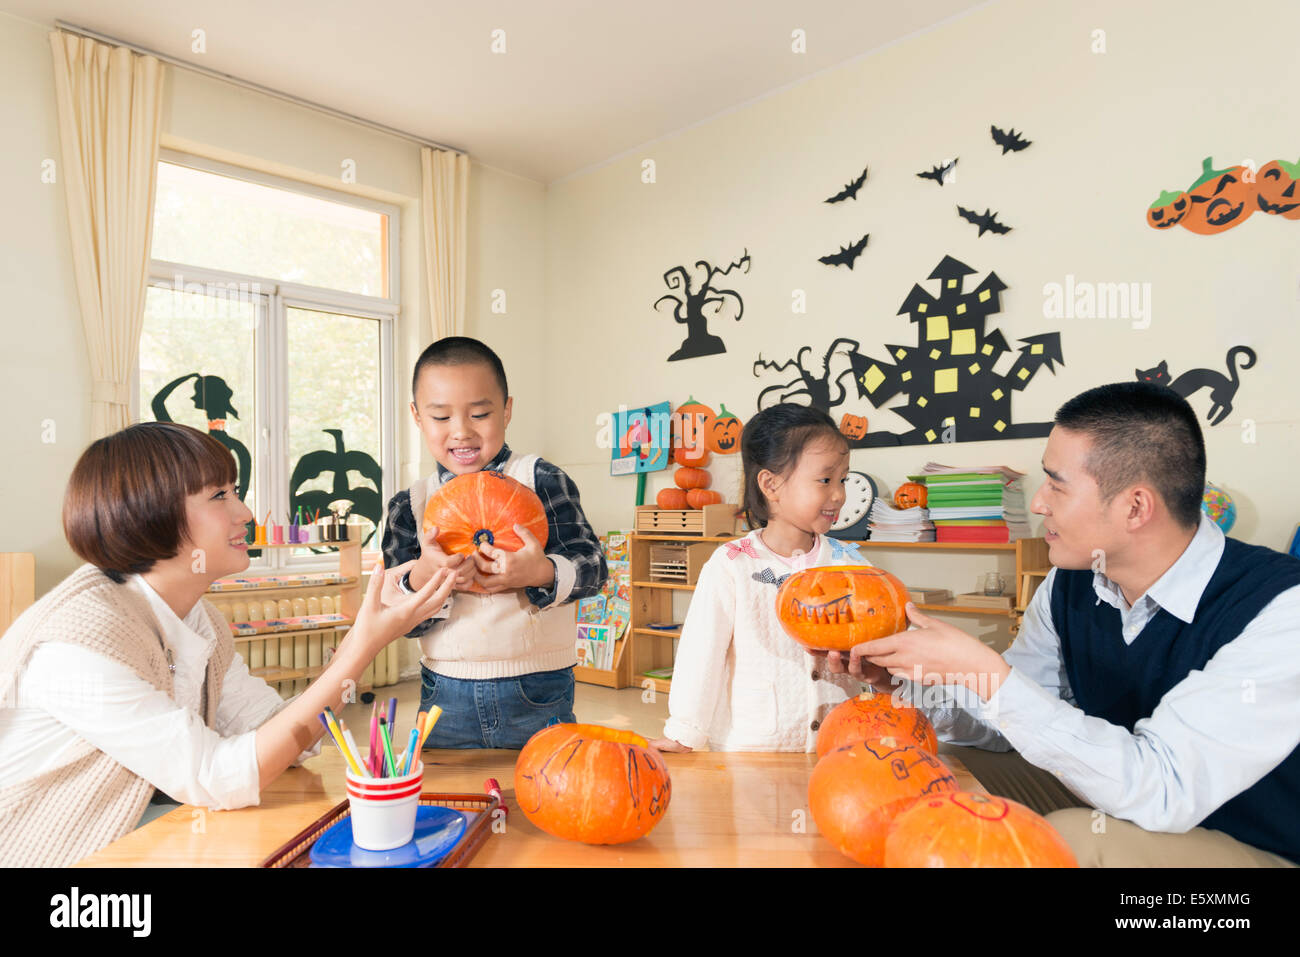 Teachers and students carving pumpkins in classroom, smiling. Stock Photo